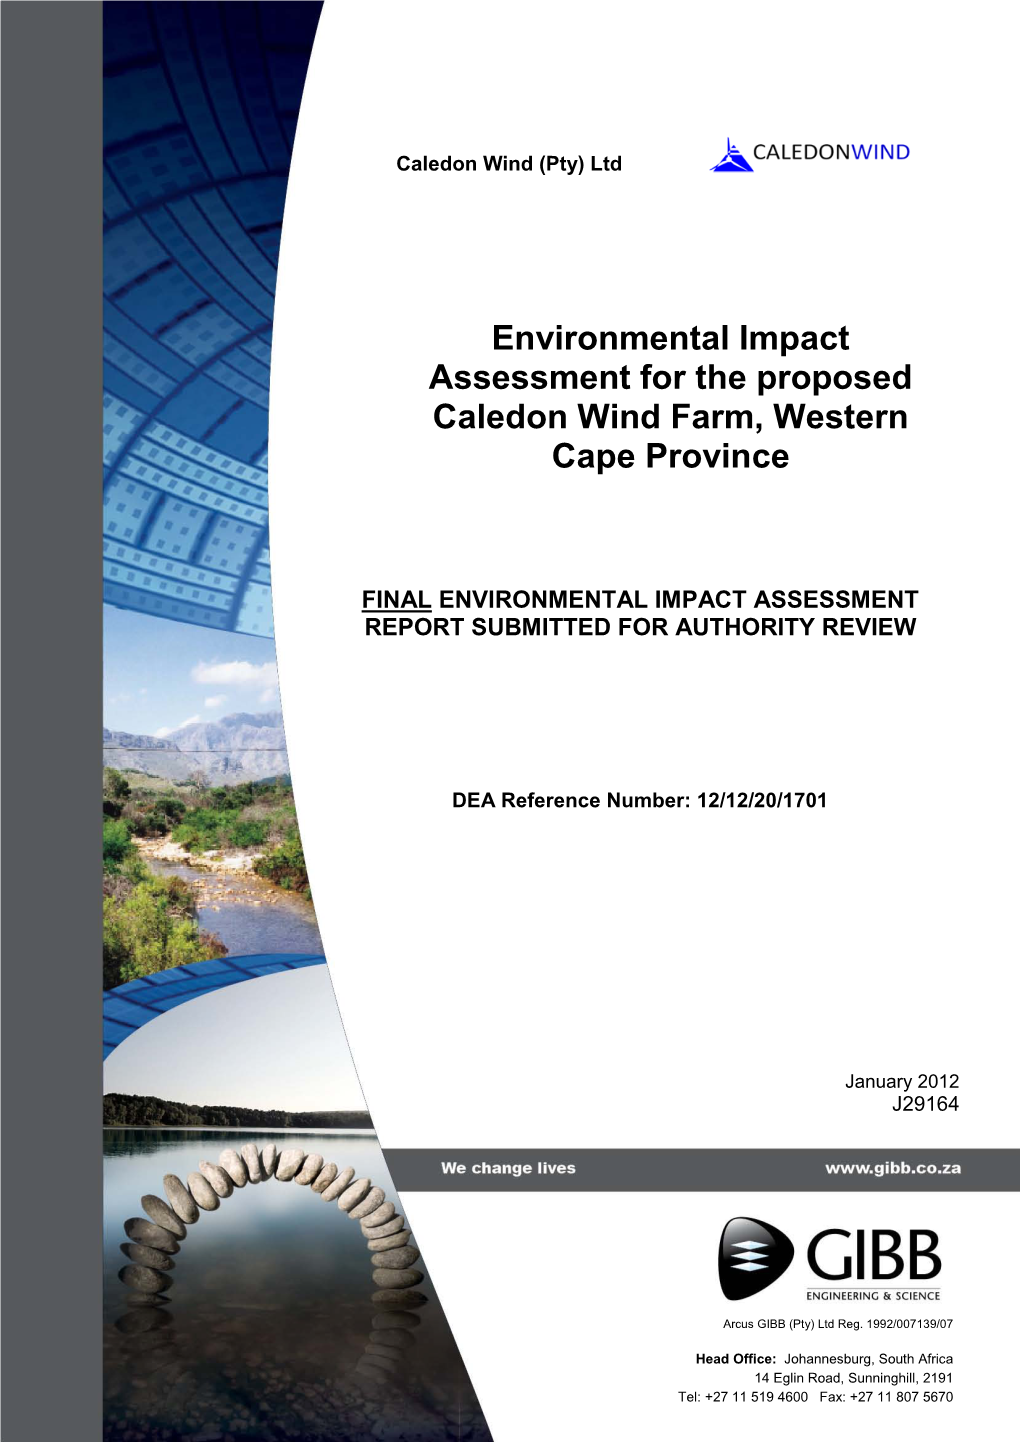 Environmental Impact Assessment for the Proposed Caledon Wind Farm, Western Cape Province